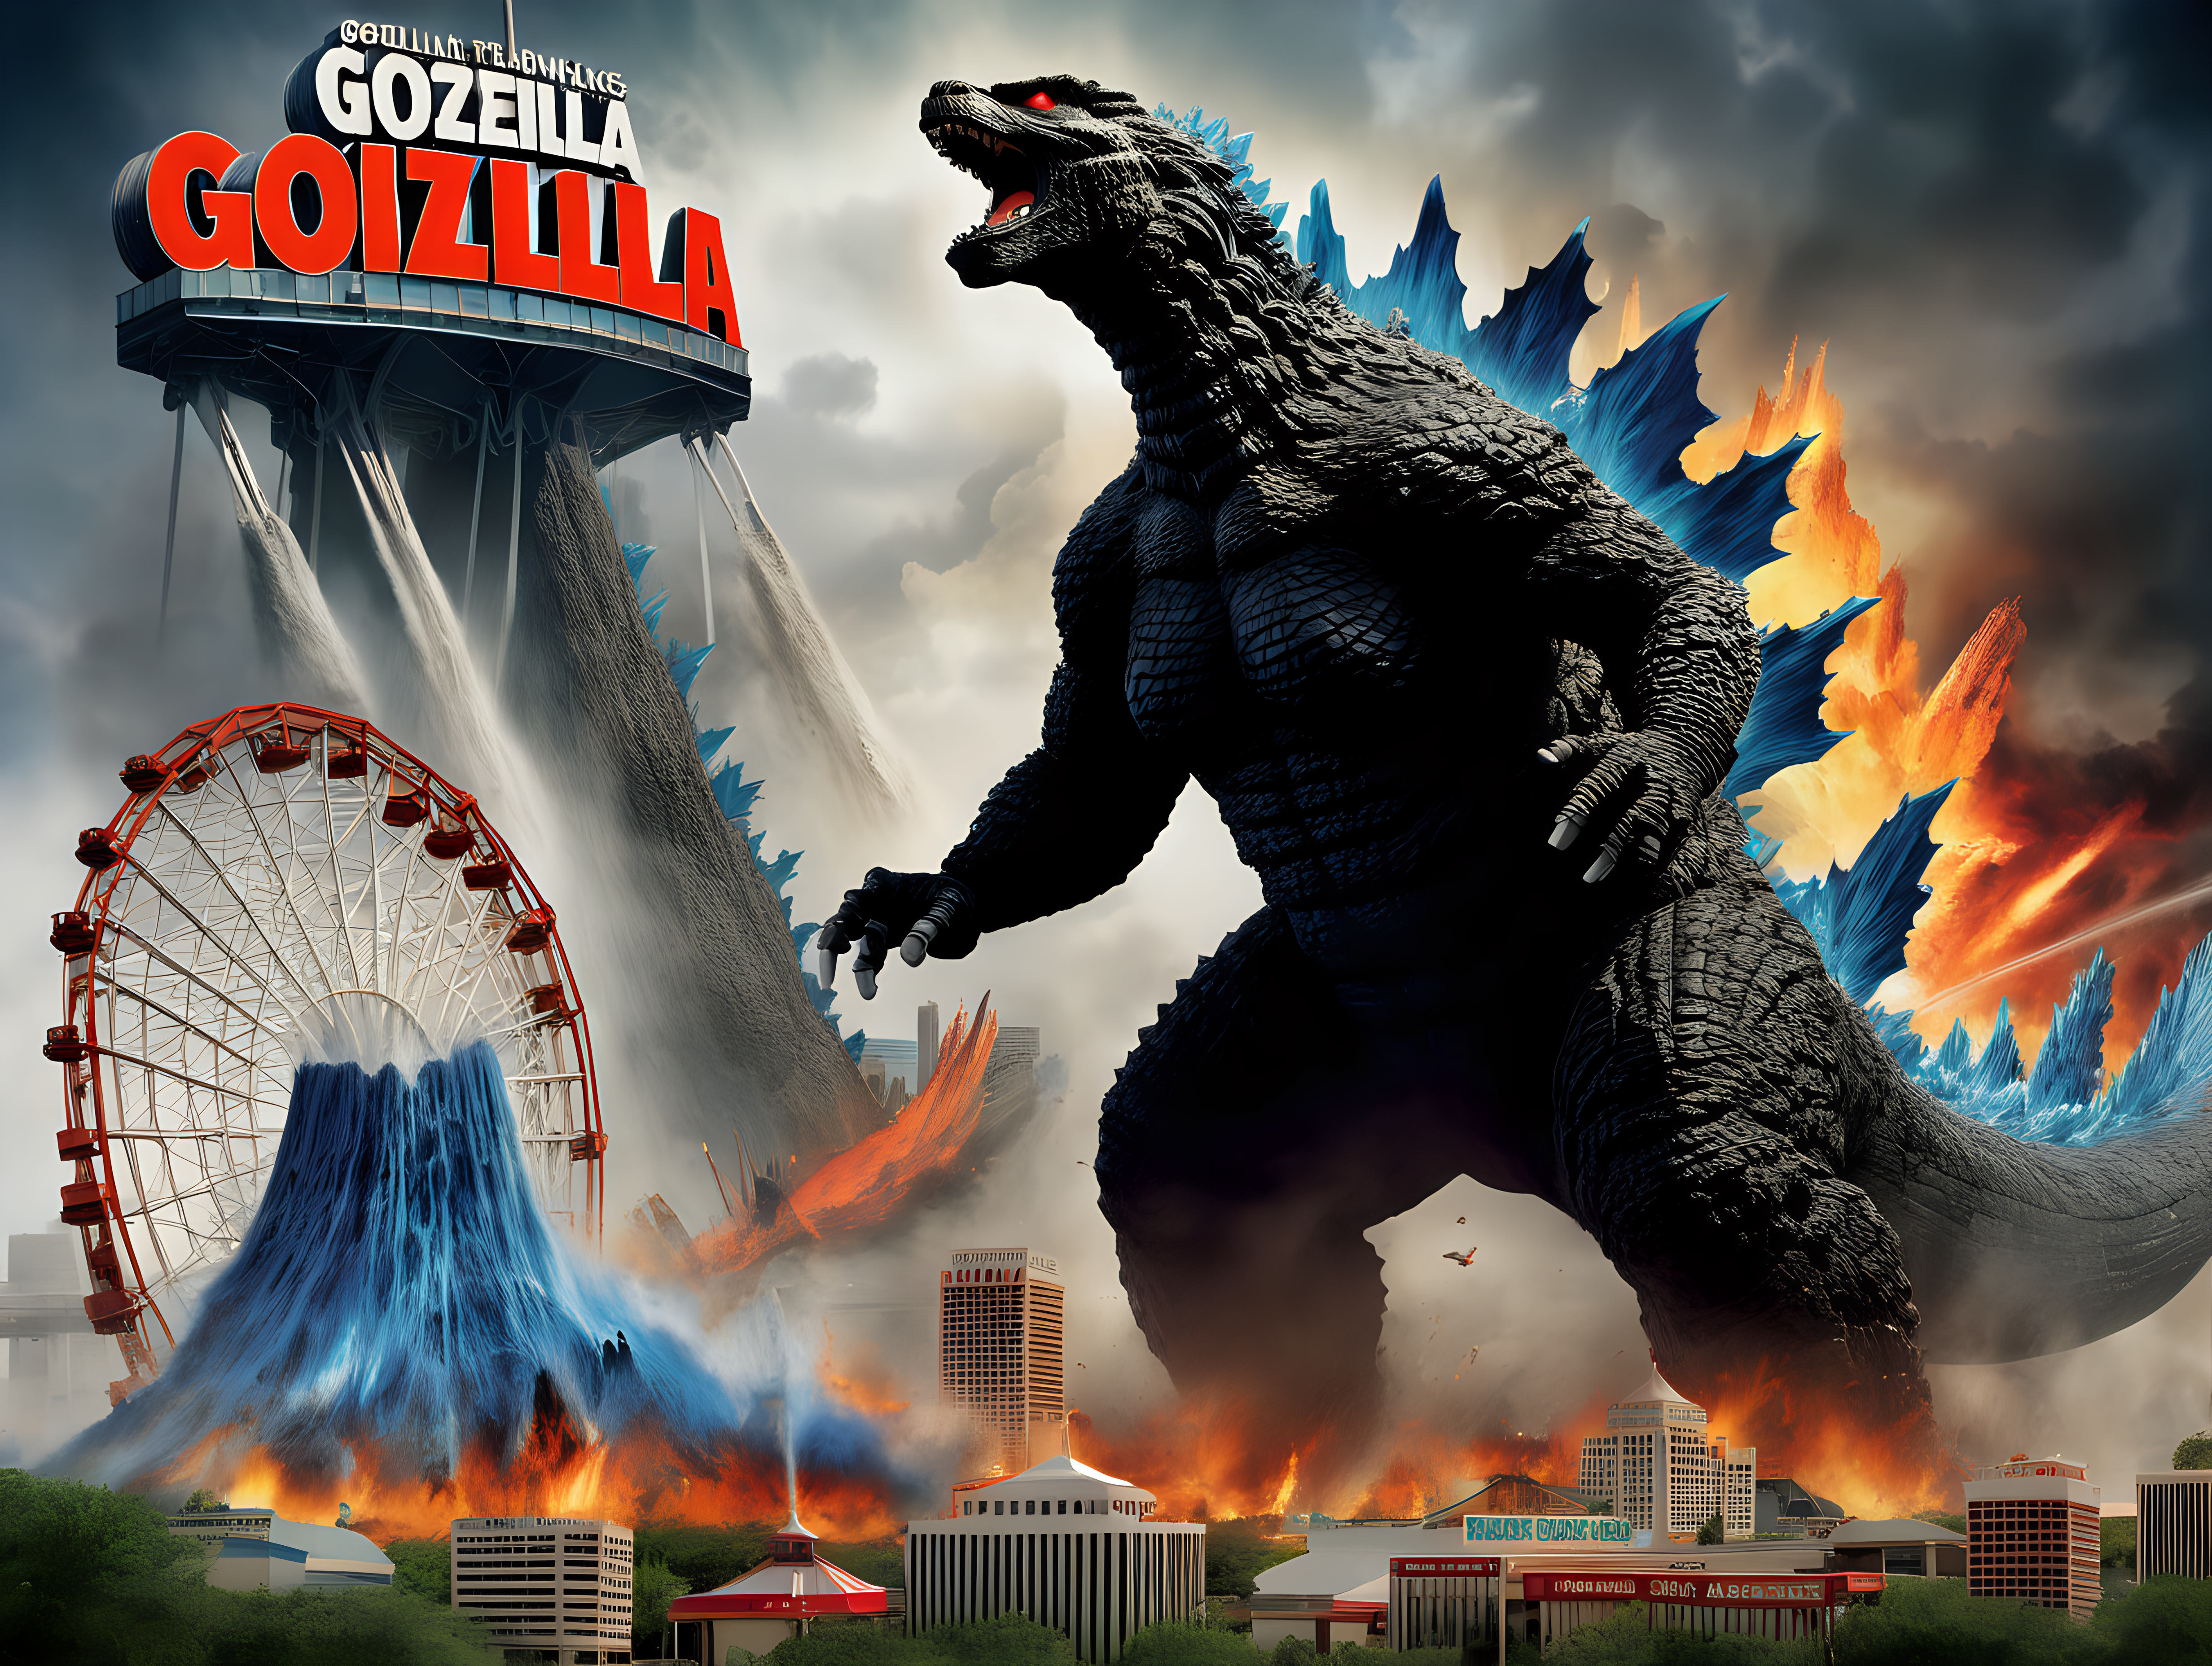 Movie poster of Godzilla destroying six flags over